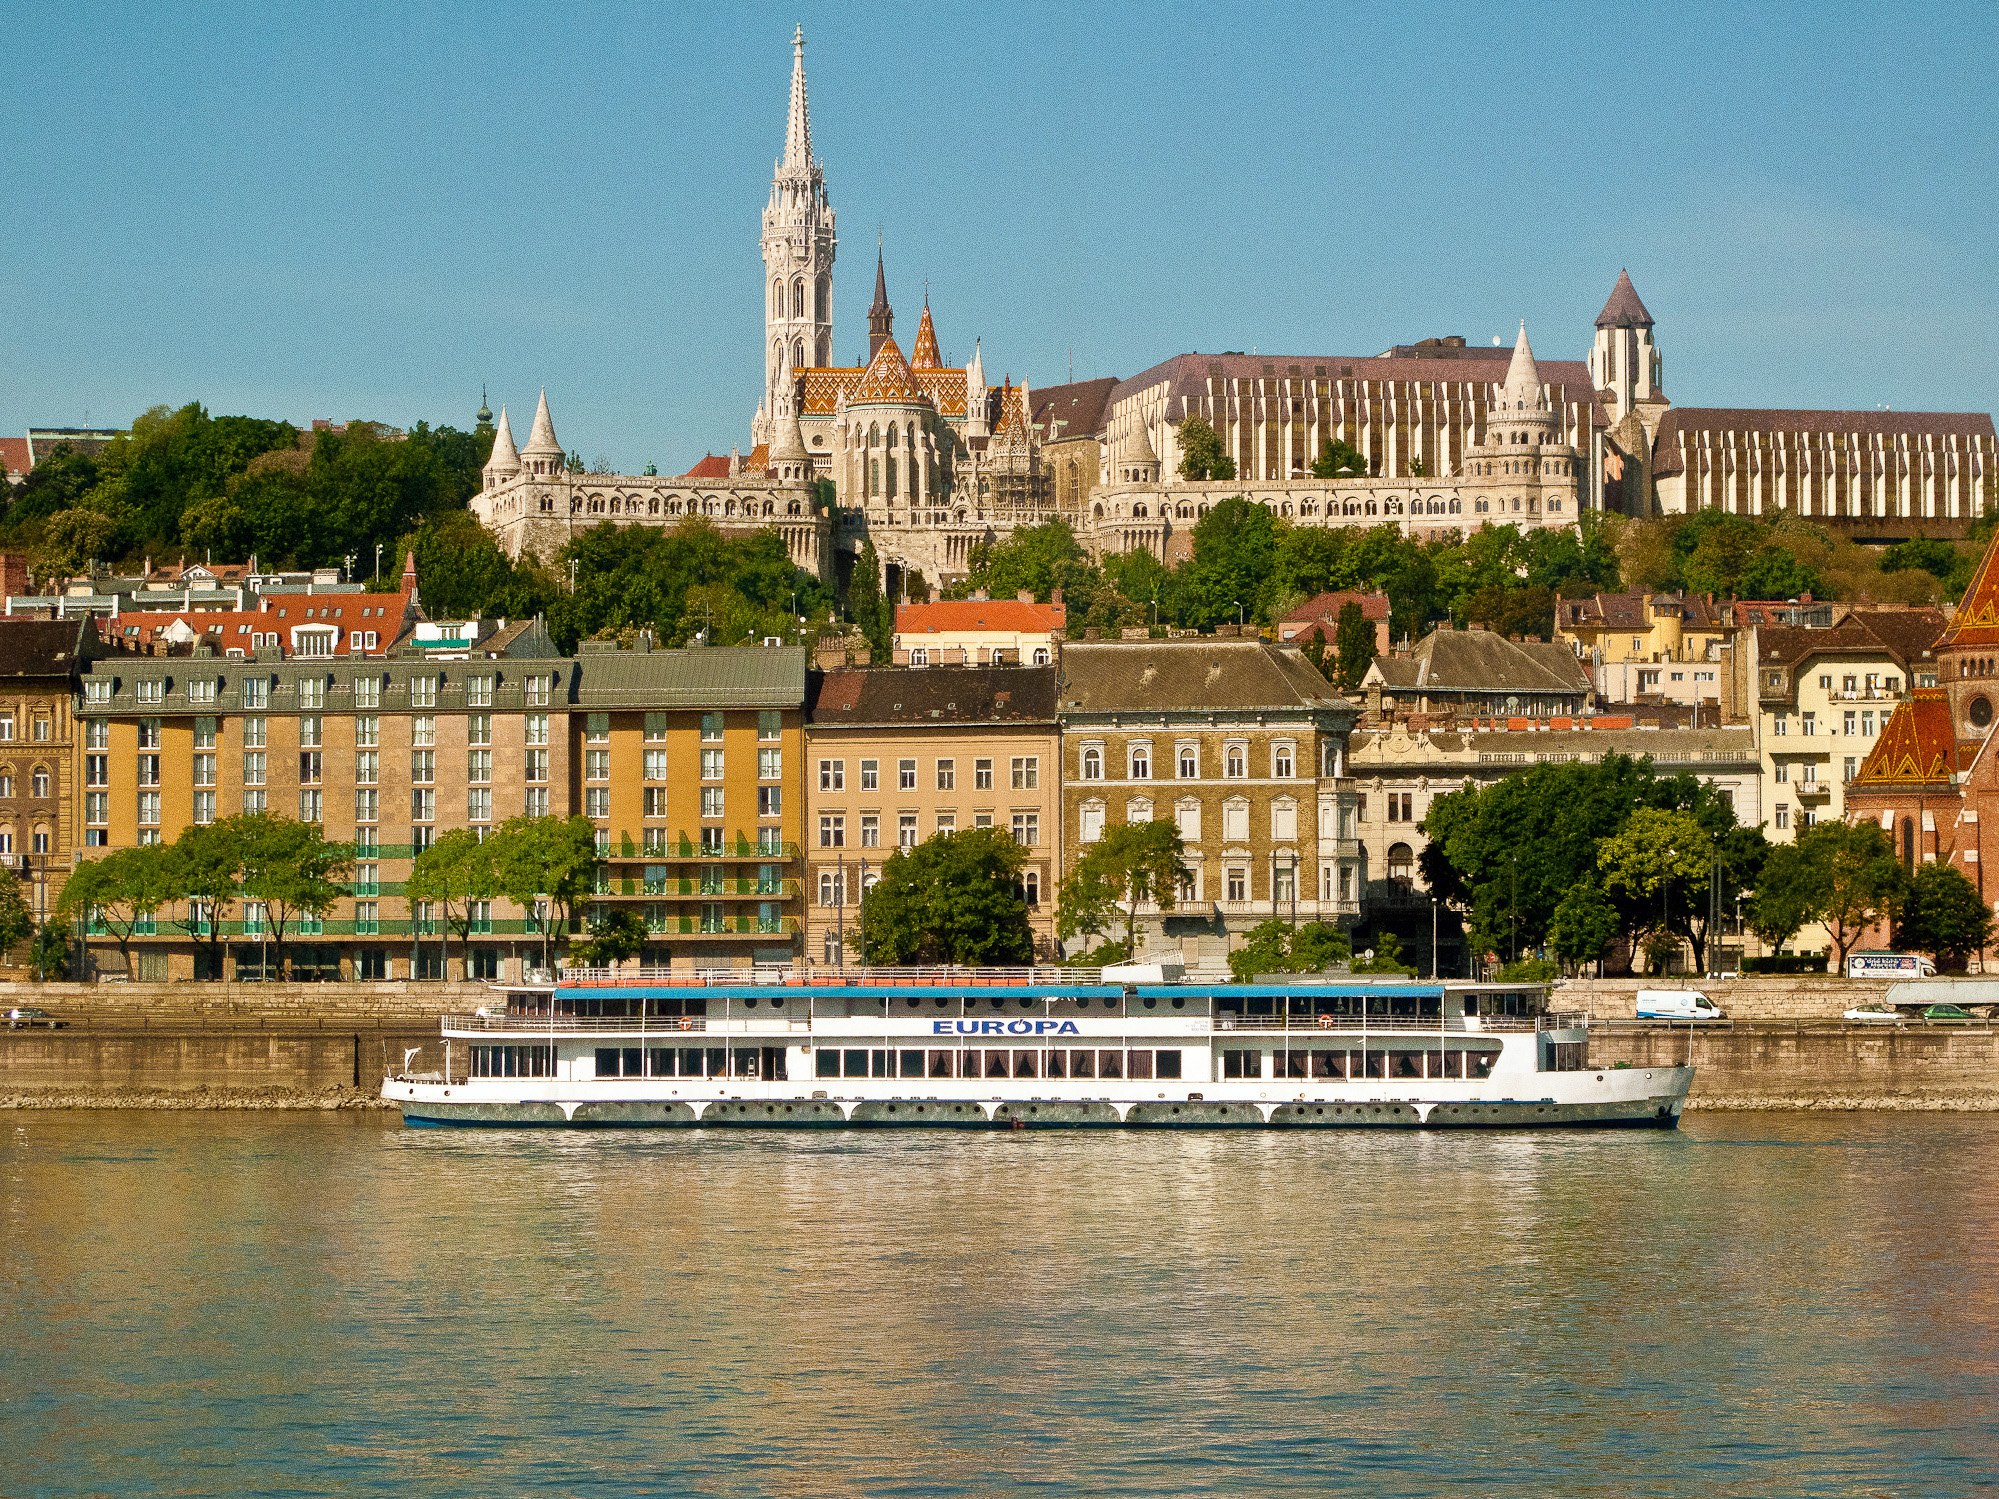 Summer River Cruises in Europe May Now Present Problems, Says Arthur Frommer | Frommer's